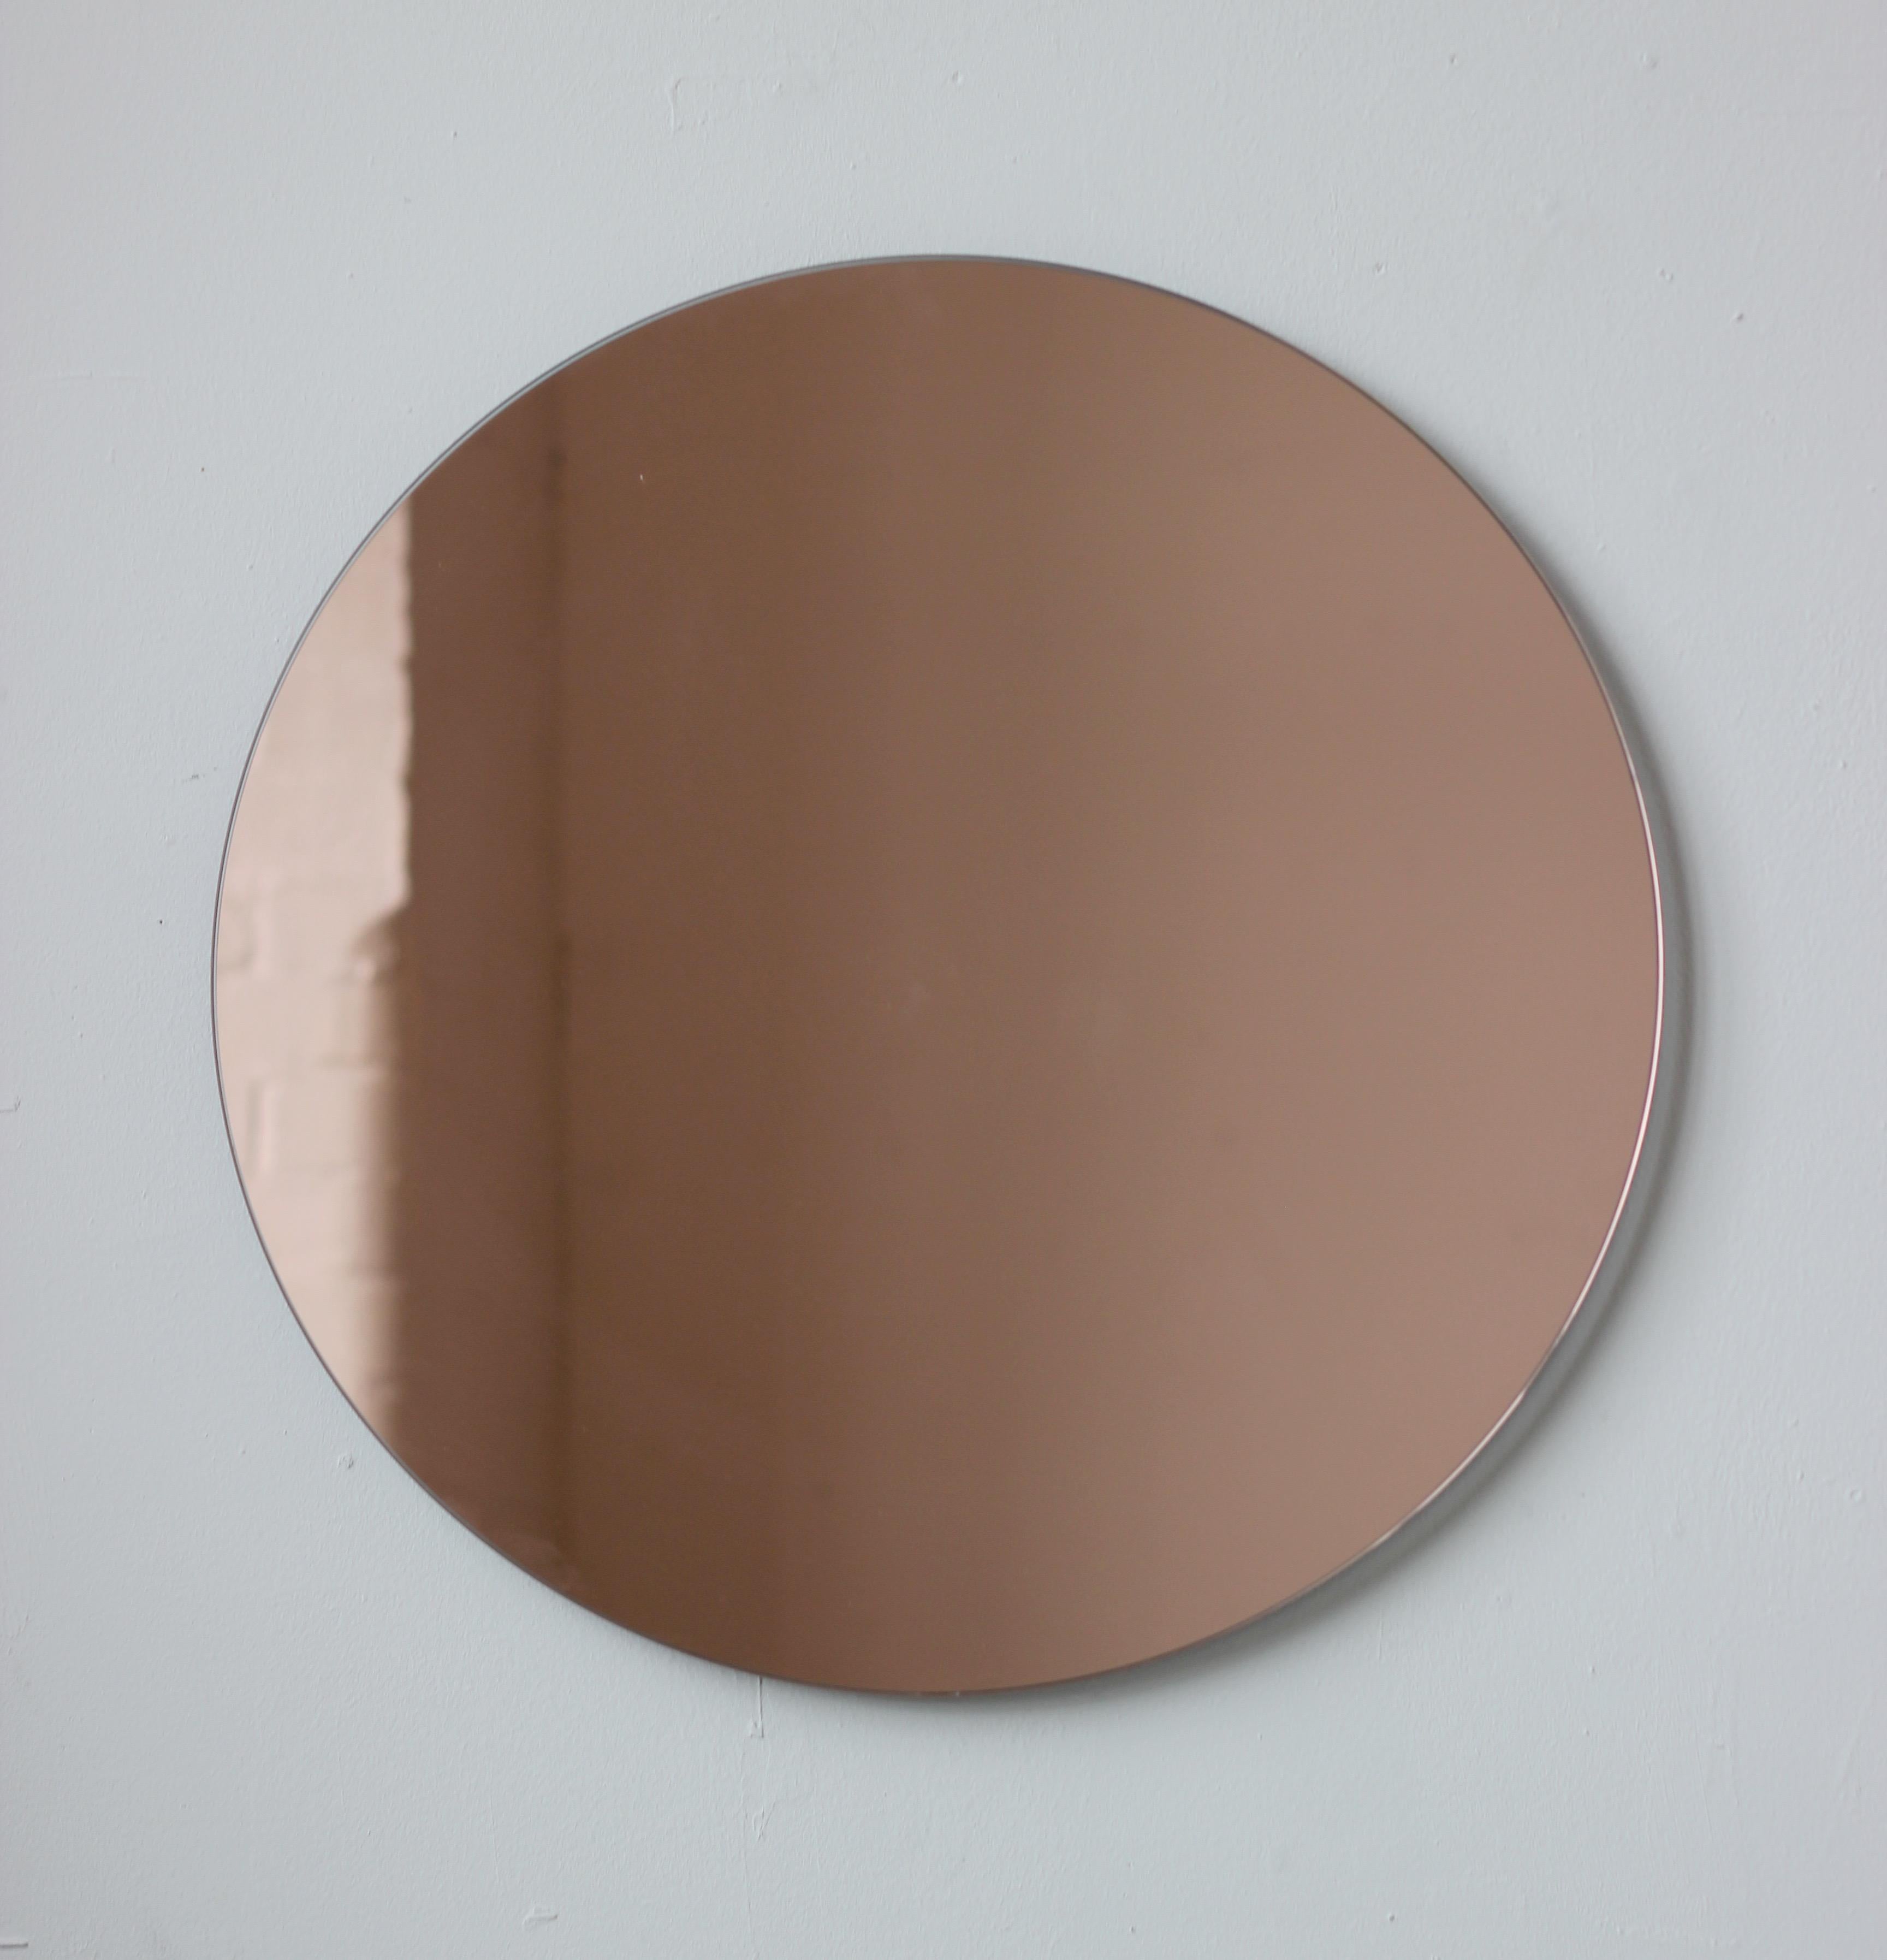 Charming and minimalist rose gold / peach tinted Orbis™ round frameless mirror with a floating effect. Quality design that ensures the mirror sits perfectly parallel to the wall. Designed and made in London, UK.

Fitted with professional plates not